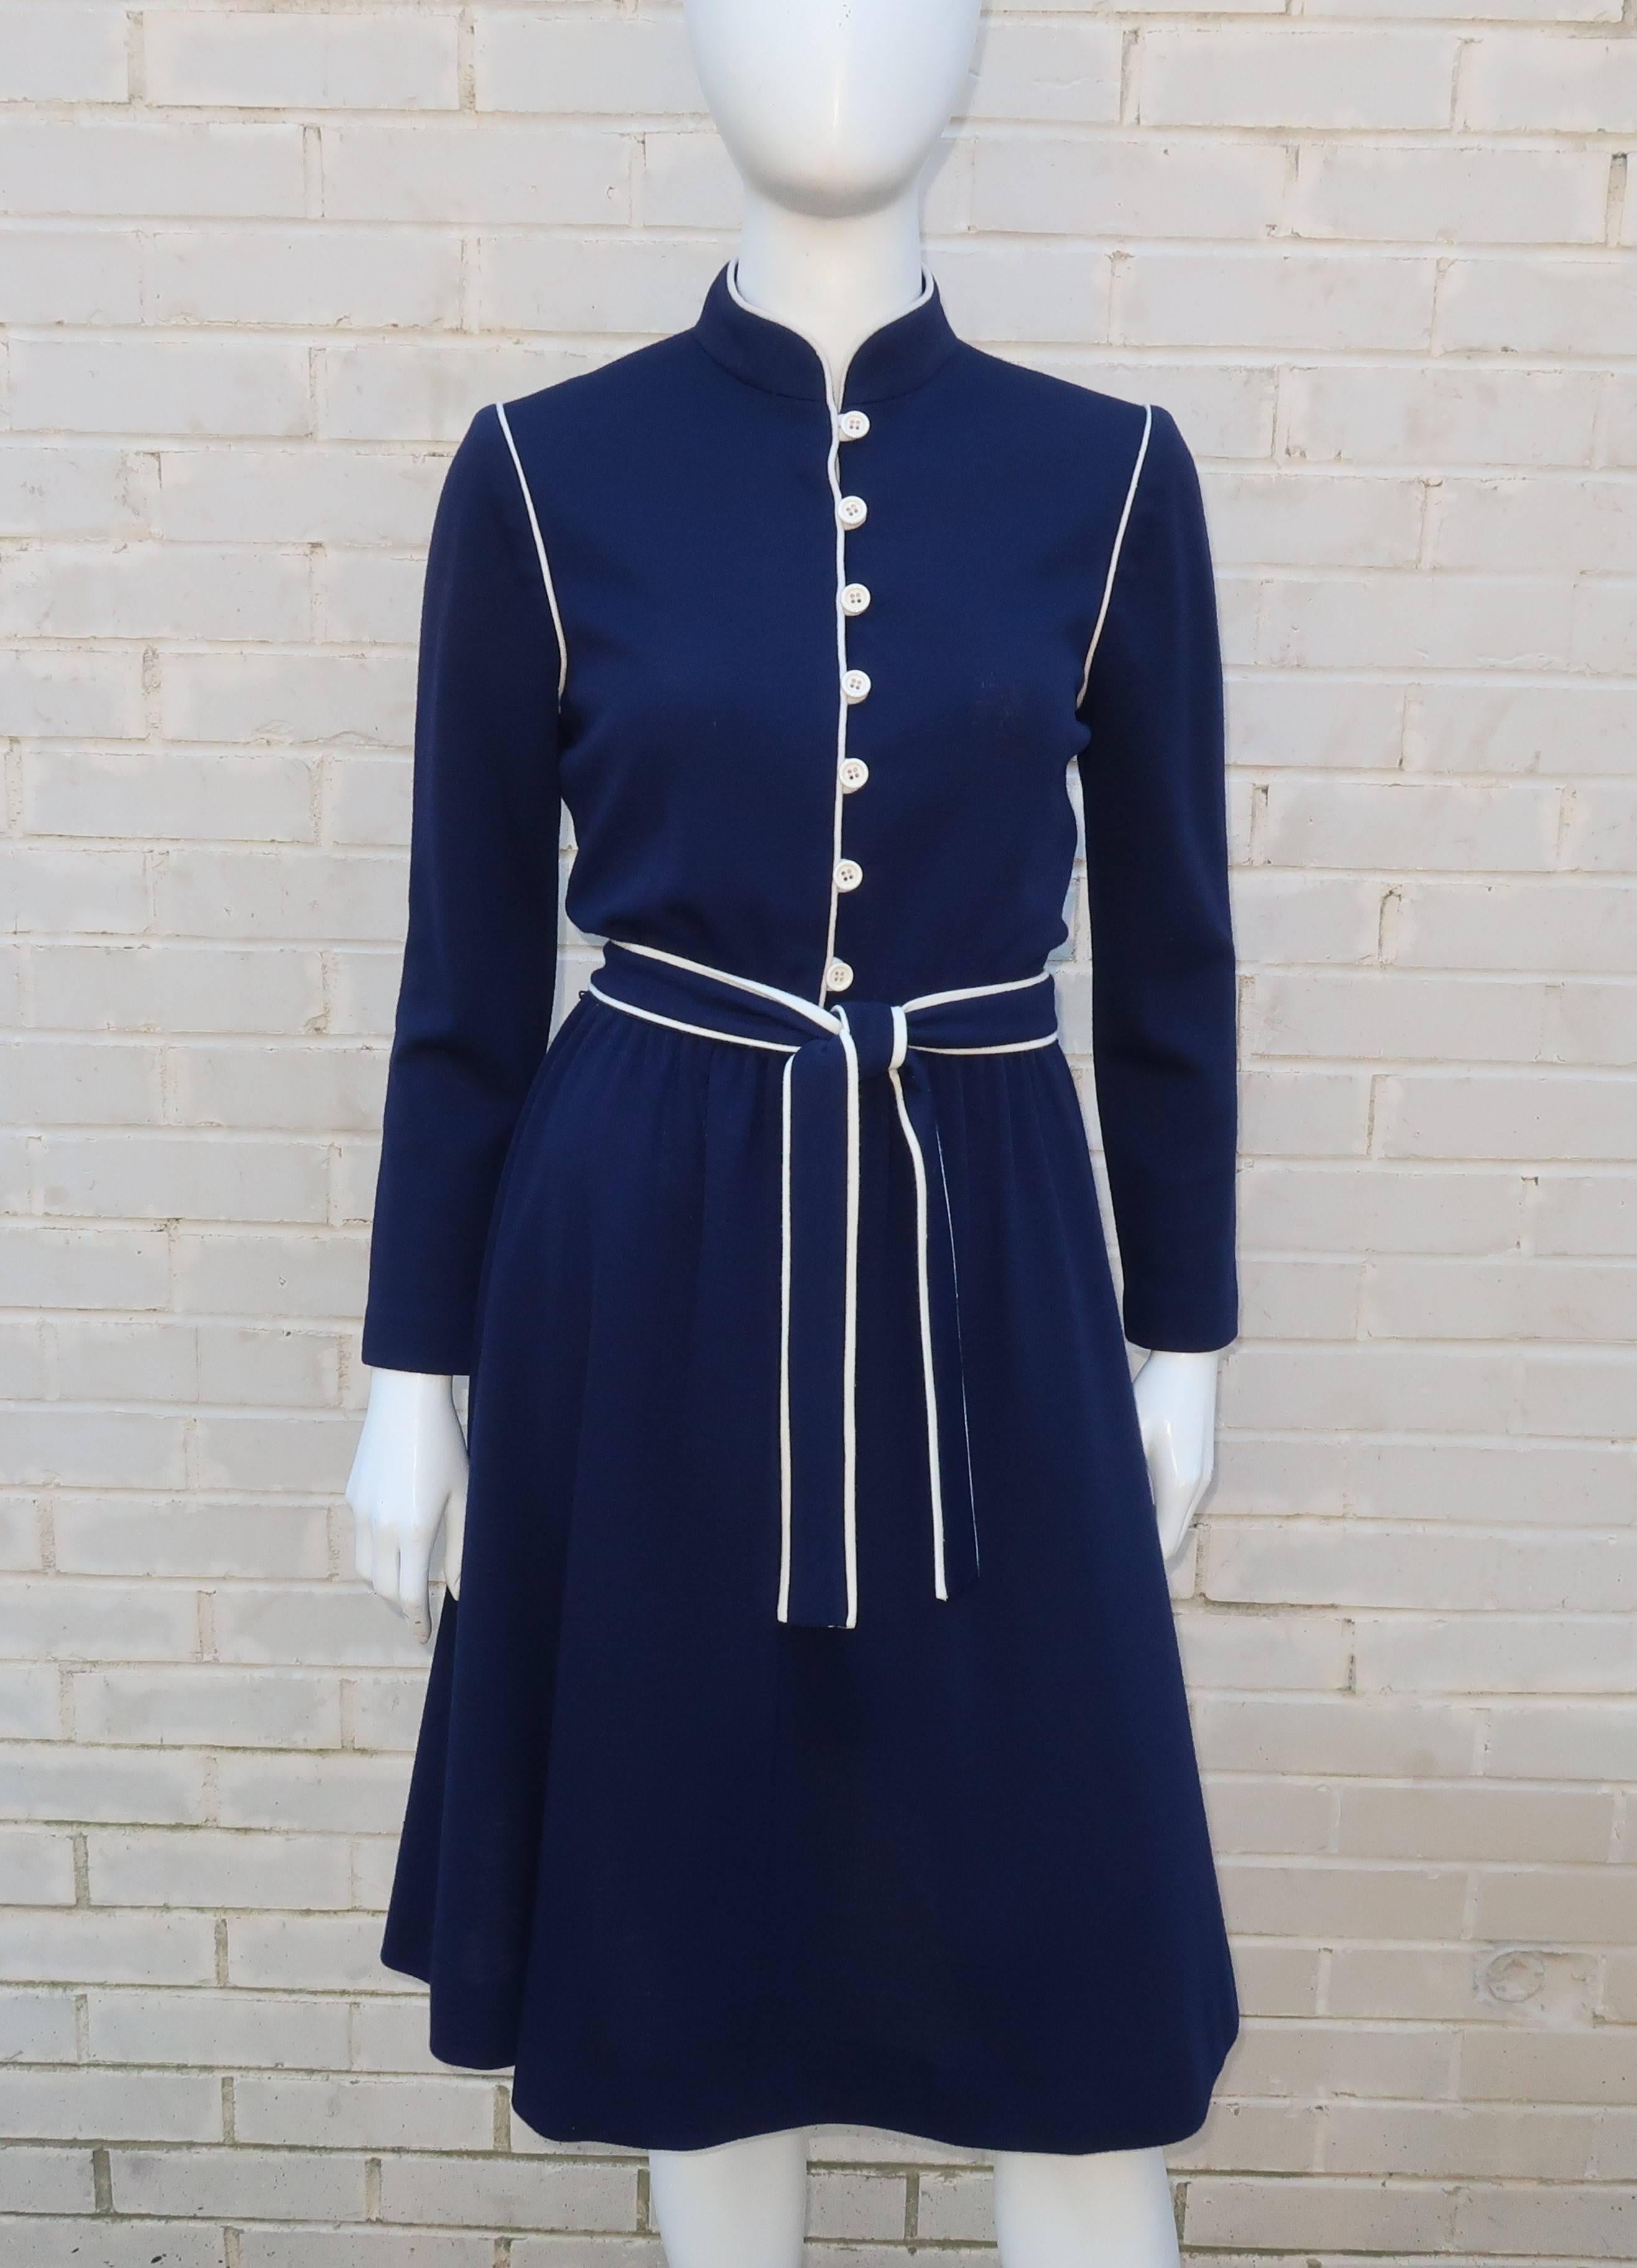 The David Warren fashion label is one of Leslie Fay's upscale lines catering to women looking for affordable and attractive designs suitable for everyday wear.  This adorable wool blended navy blue knit dress fits that description to a 'T' and can